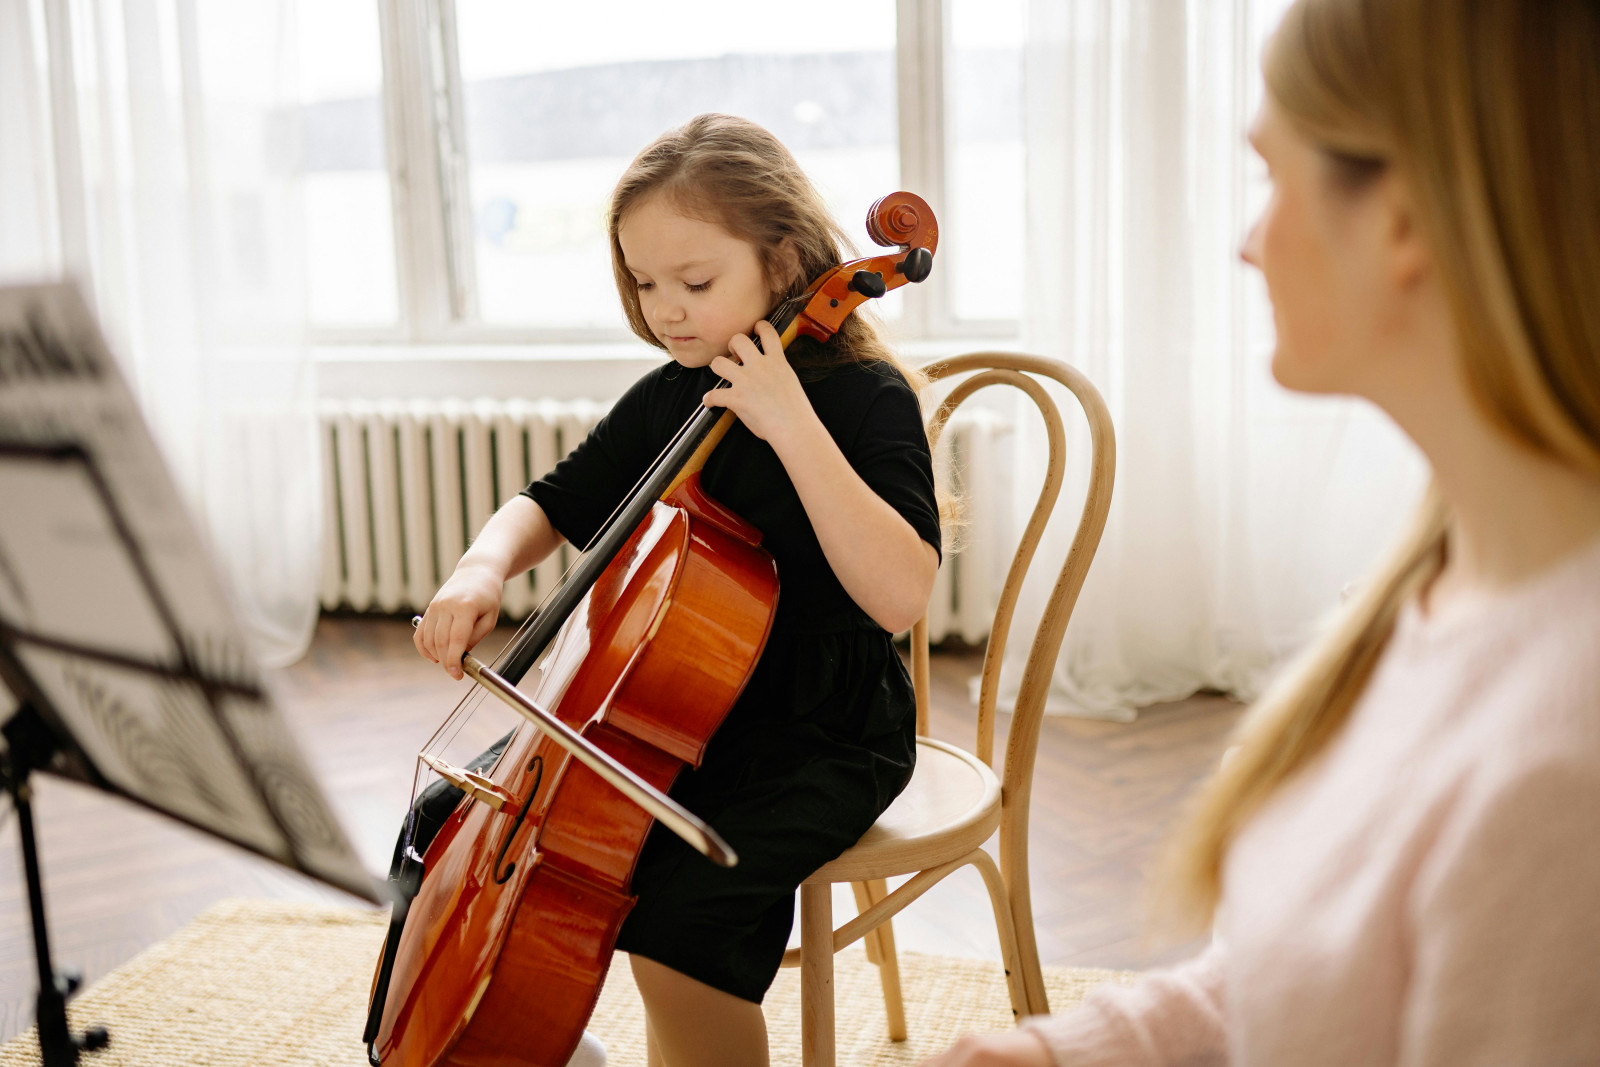 What Every Child Should Know Before Beginning to Play a Musical Instrument